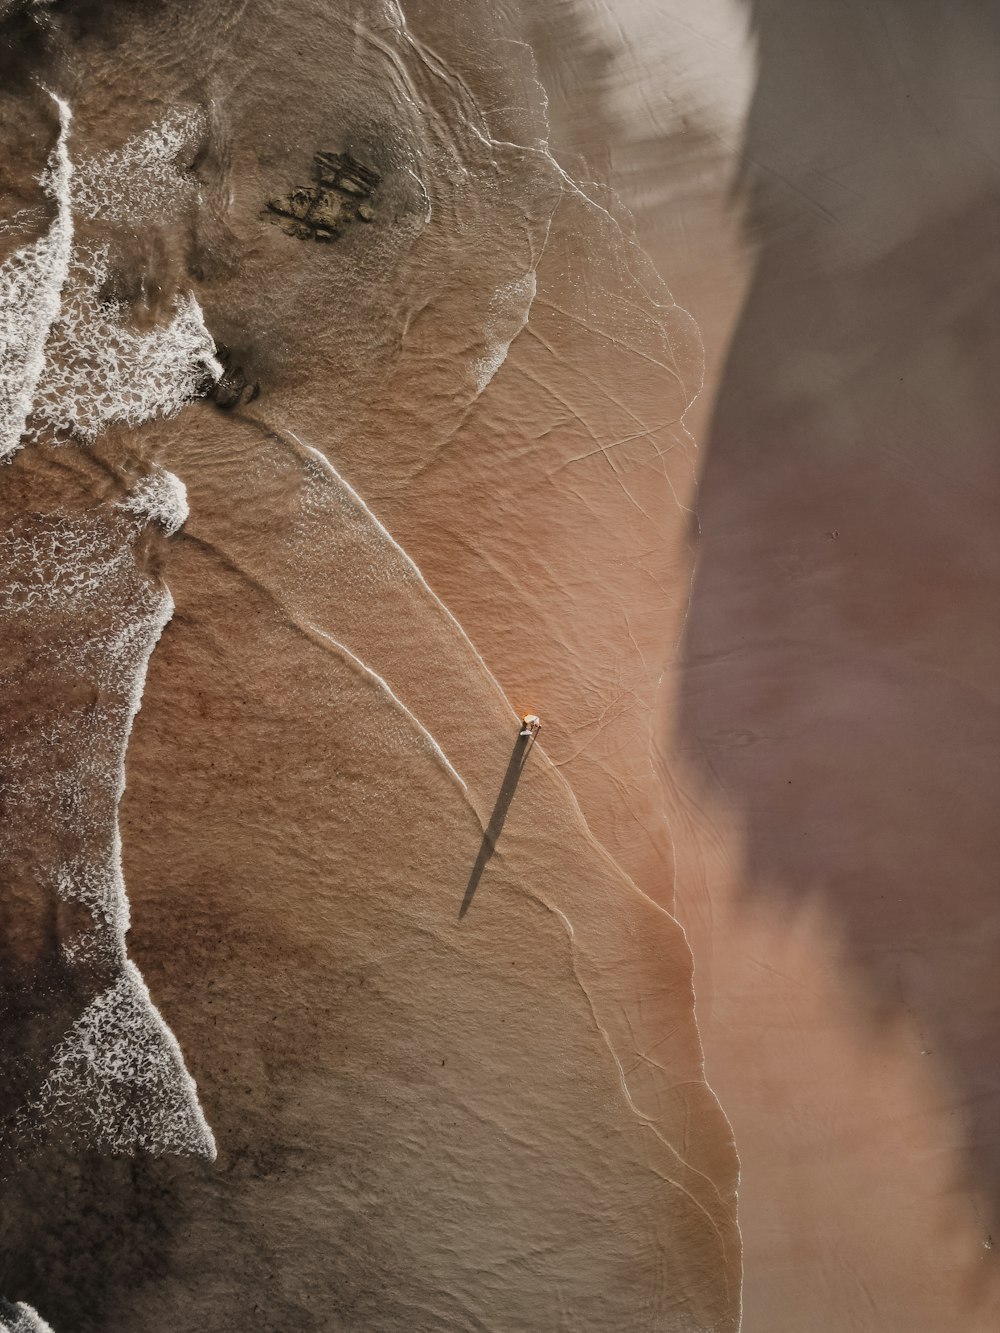 an aerial view of a rock formation with a knife sticking out of it